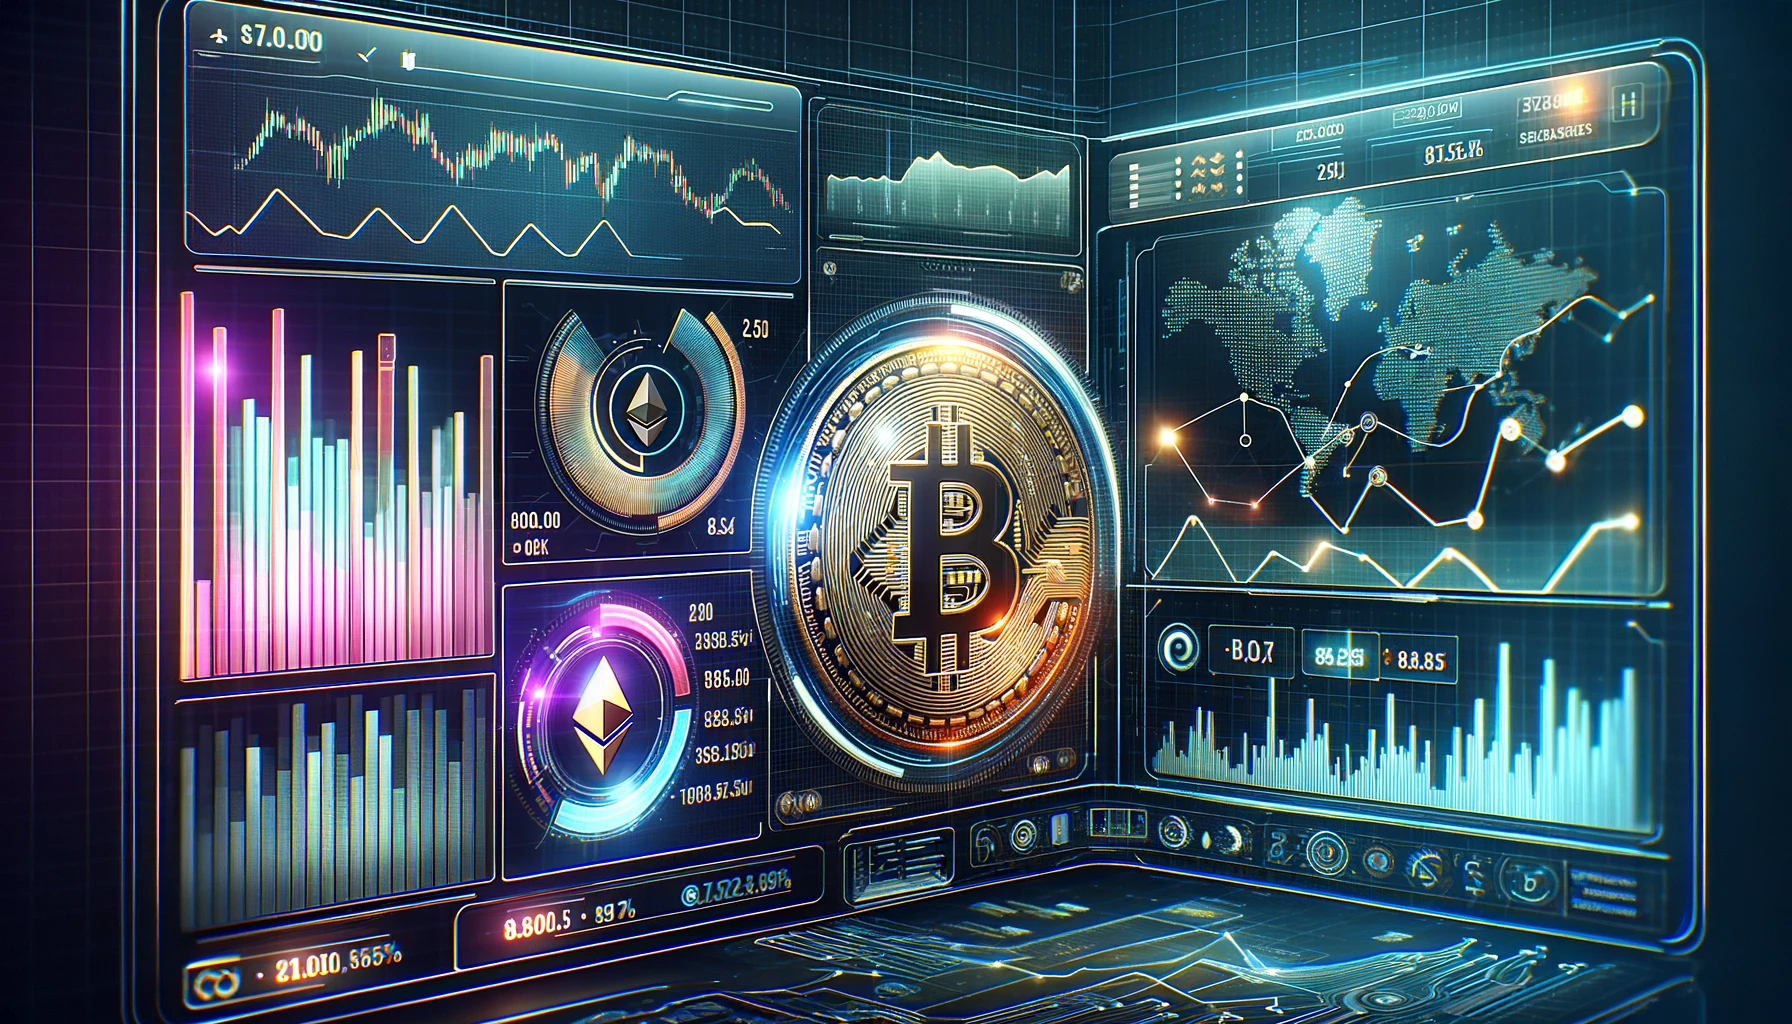 $Crypto Calculator and crypto price prediction tool image with charts and cryptocurrencies such as Bitcoin, Ethereum, etc., in the background to represent the different crypto predictions